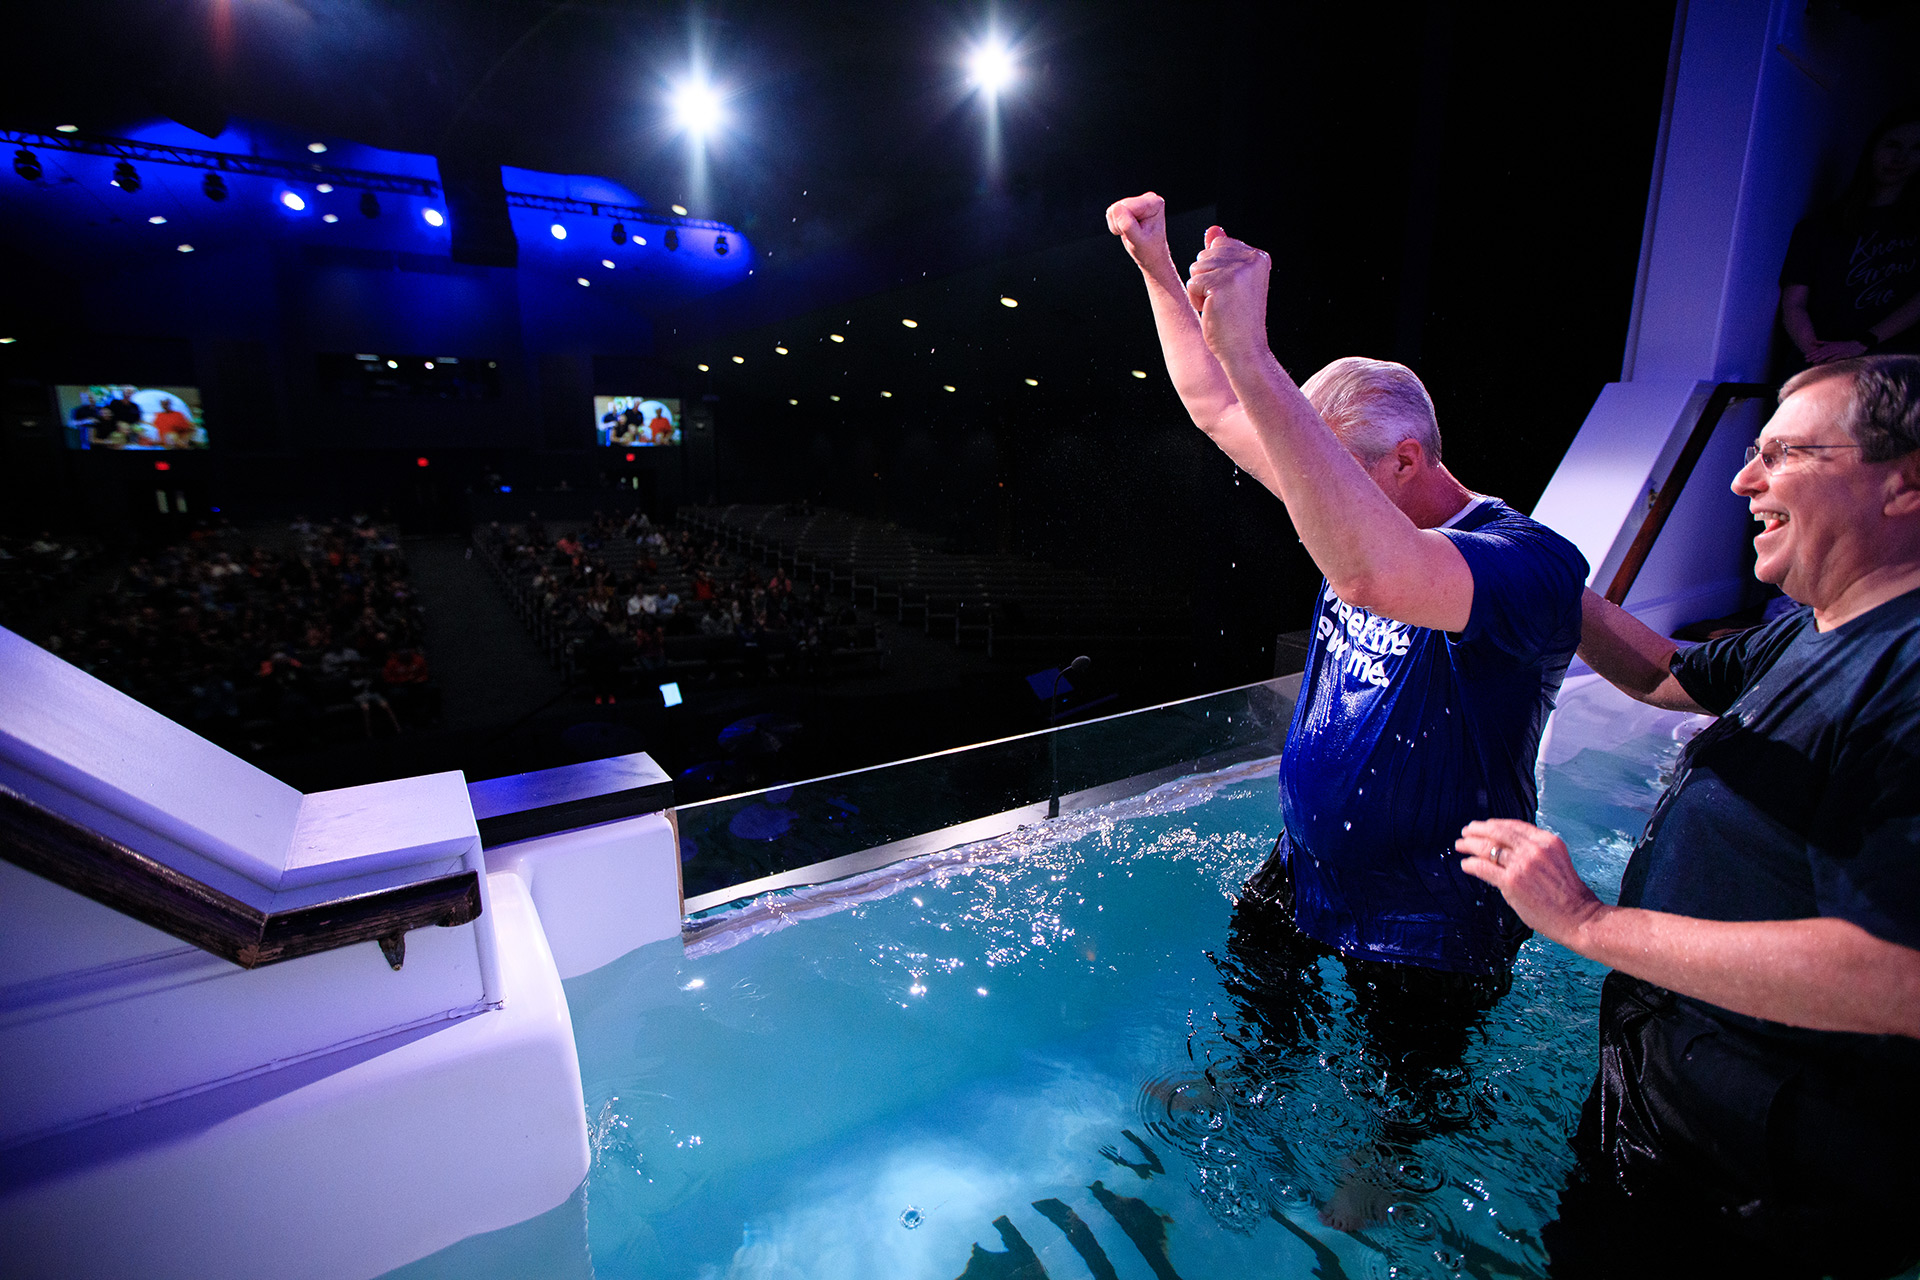 A man raising his hands in celebration after being baptized